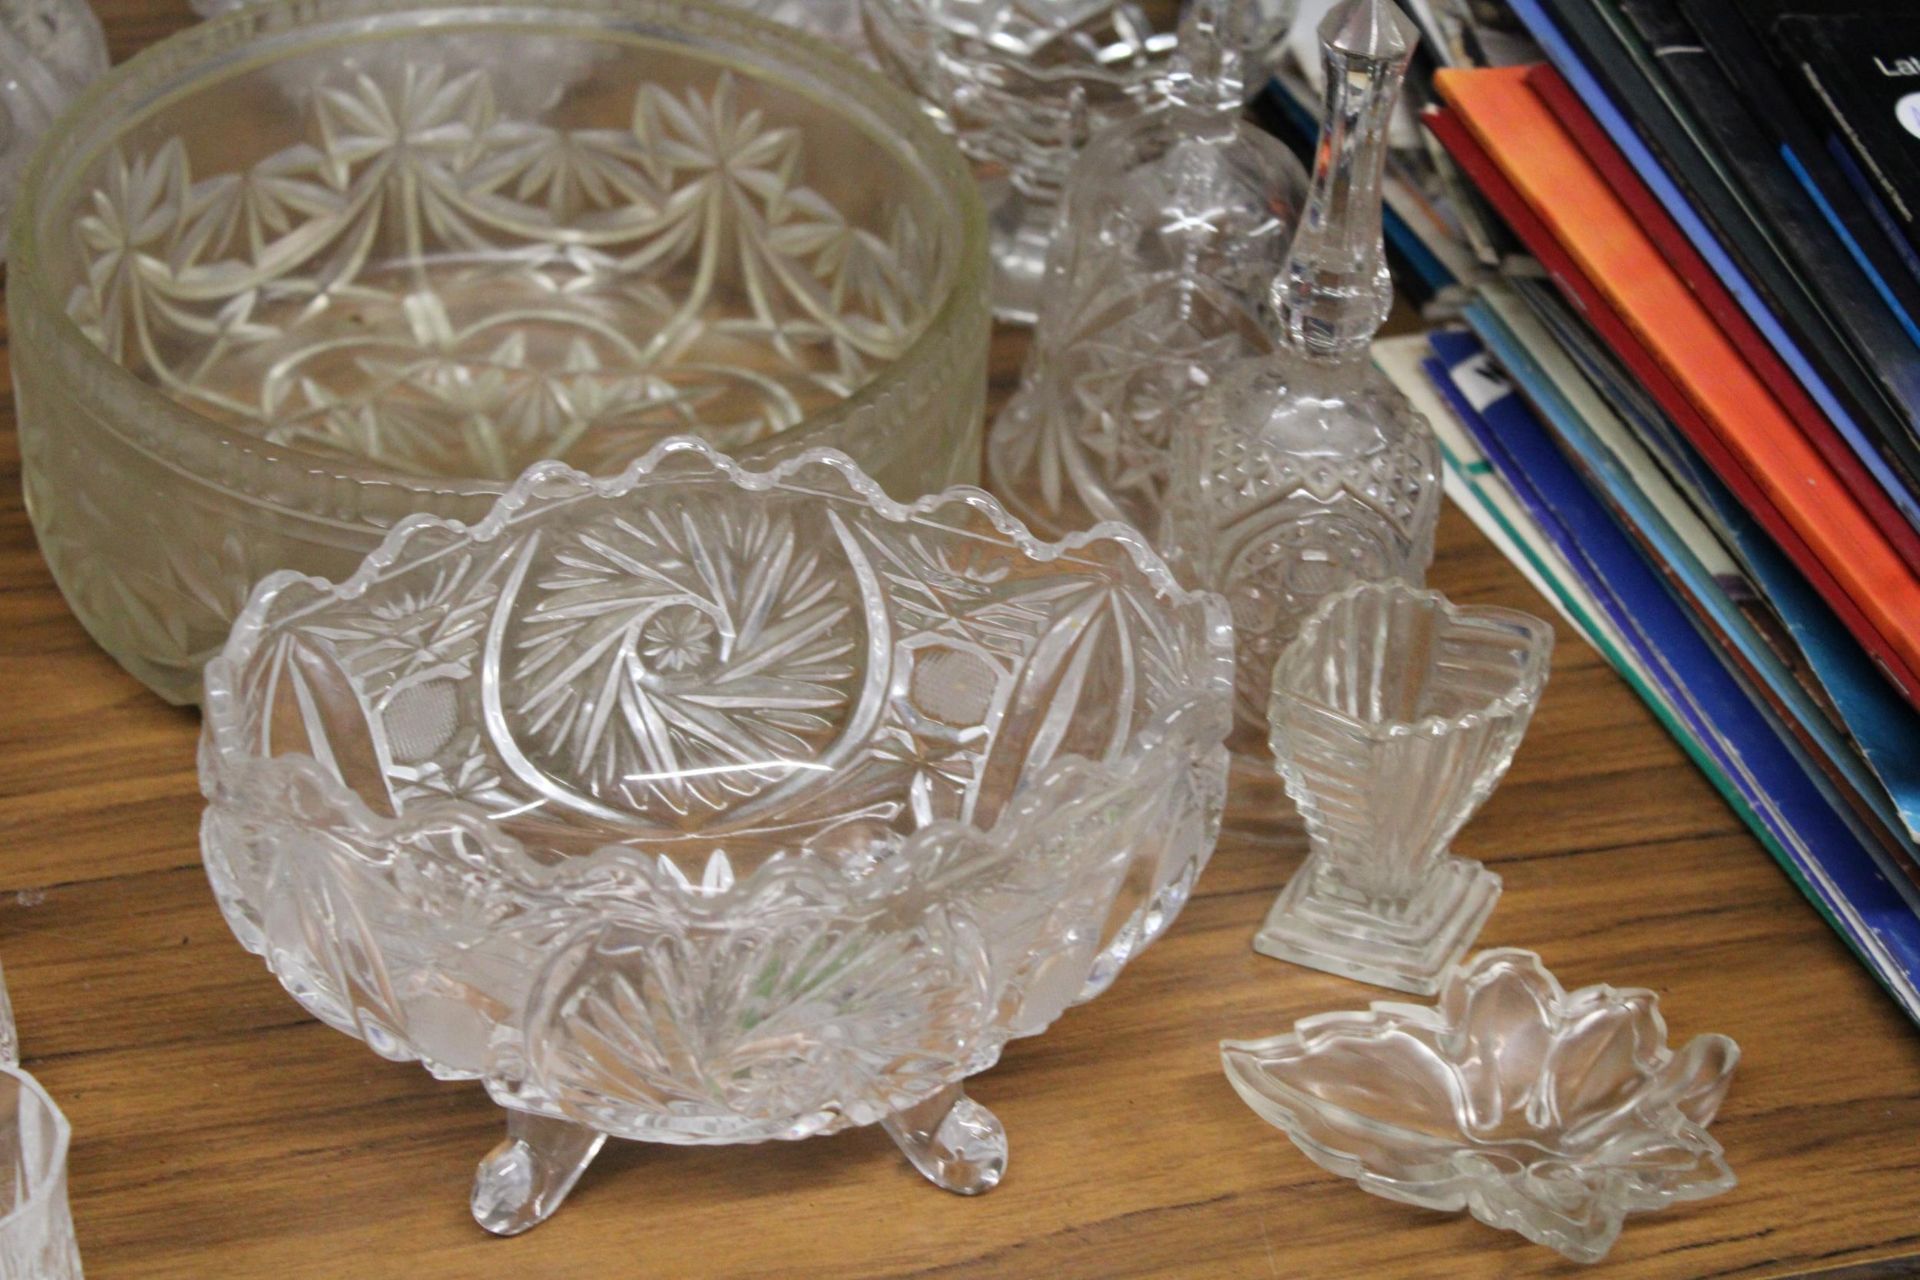 A QUANTITY OF GLASSWARE TO INCLUDE DECANTERS, BOWLS, BELLS, GLASSES, ETC - Image 3 of 3